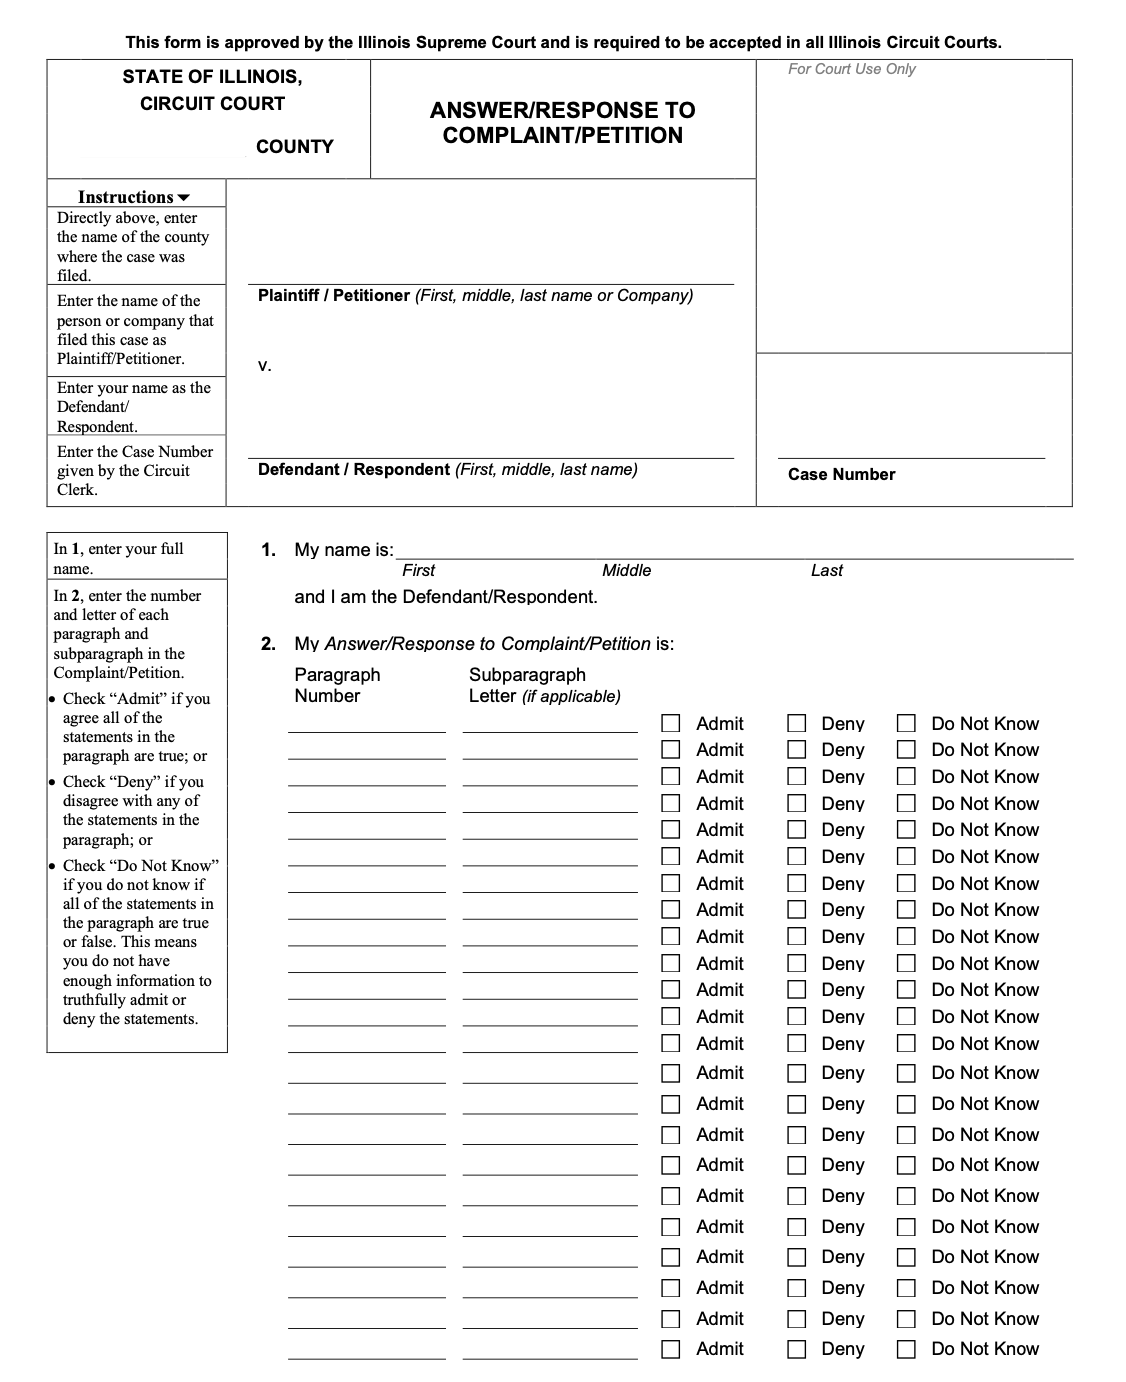 Image of a blank Illinois Answer/Response to Complaint/Petition Form